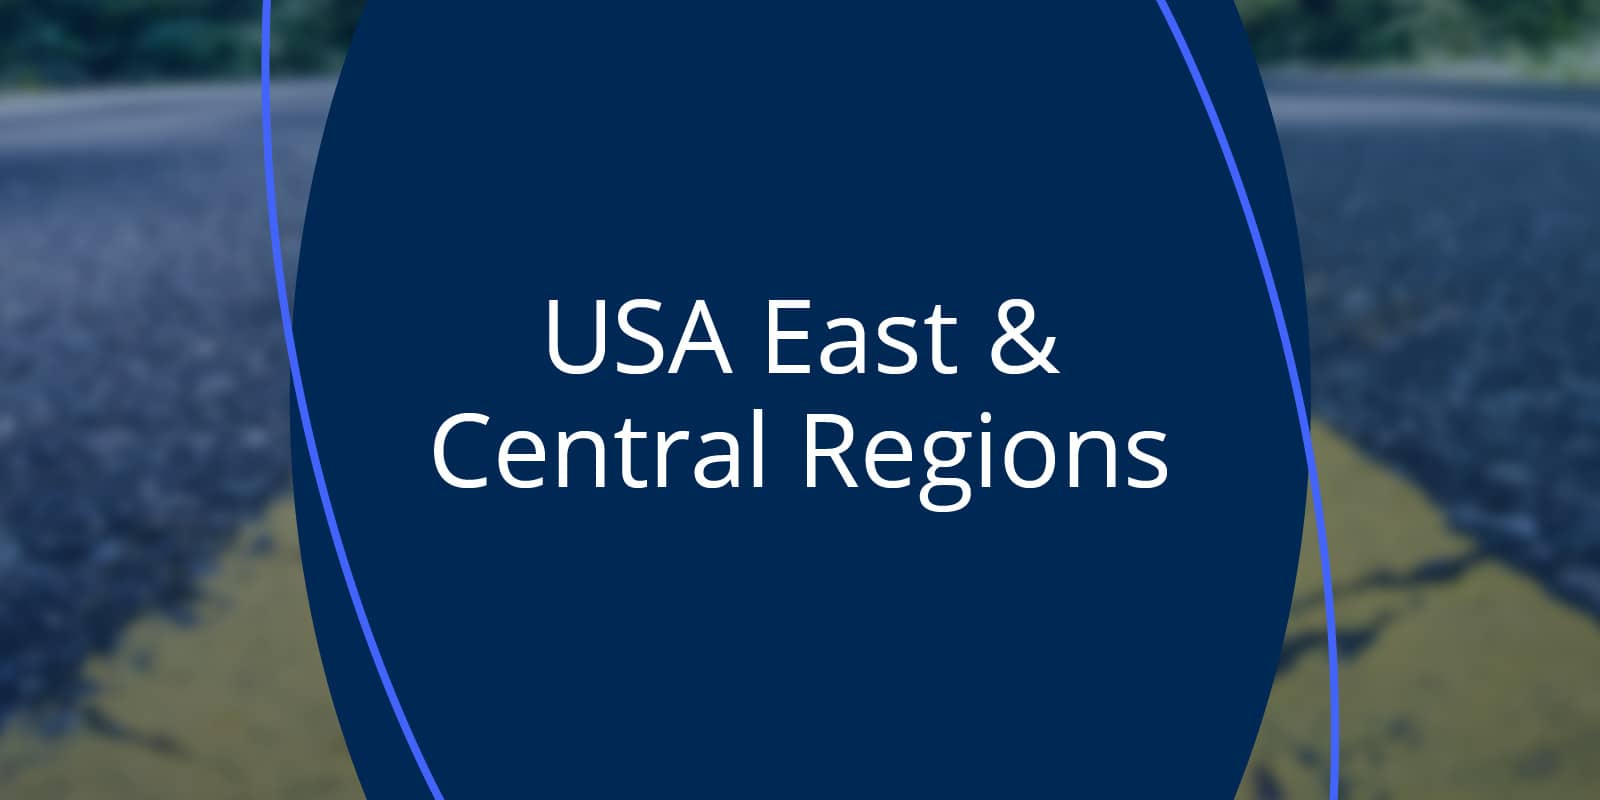 Xchange USA East & Central Regions Card